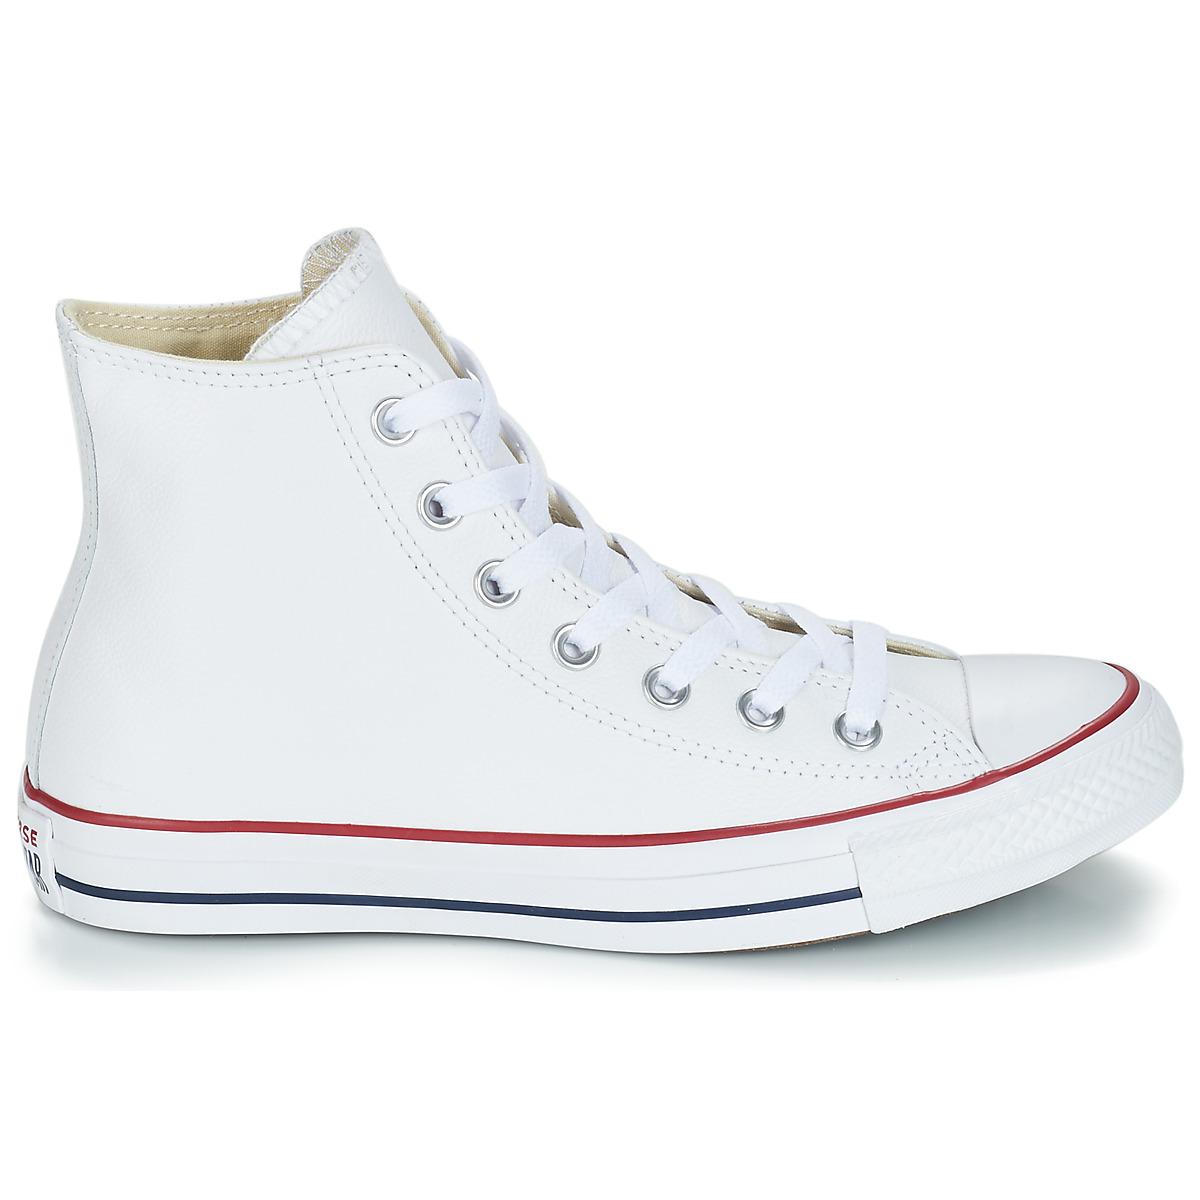 Converse Blanc CHUCK TAYLOR ALL STAR LEATHER HI ypcgd3PY